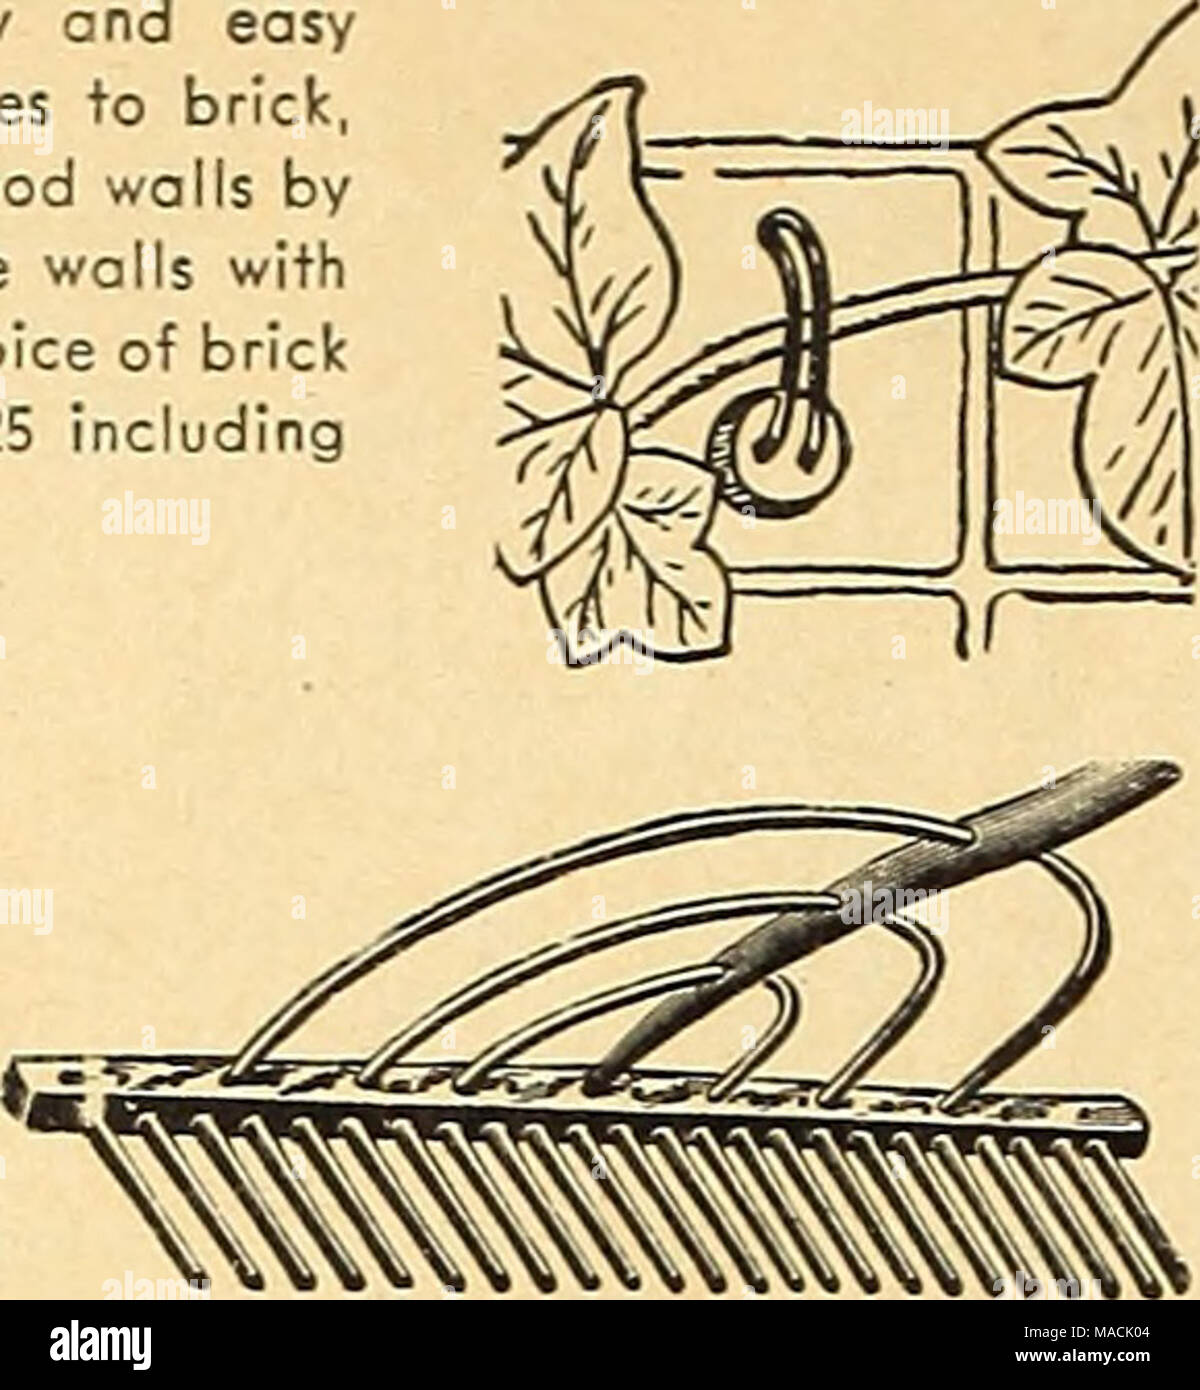 . Dreer's wholesale catalog for market gardeners truck growers florists landscape architects 1945 : Dreers quality seeds bulbs . Rugg Wood Rake Disston Hand Pruning Saw Saws. Disston Hand Pruning. No. 31. 20-in. $2.00, postpoid. Pacific Coast Type Saw Pacific Coast Type Saw. #15 $2.25, postpaid. Pruning Saw, California Pattern #166. A popular type with taper- ground, curved, steel blade and 8 point teeth cutting on the draw stroke. $1.95, postpaid. Stock Photo